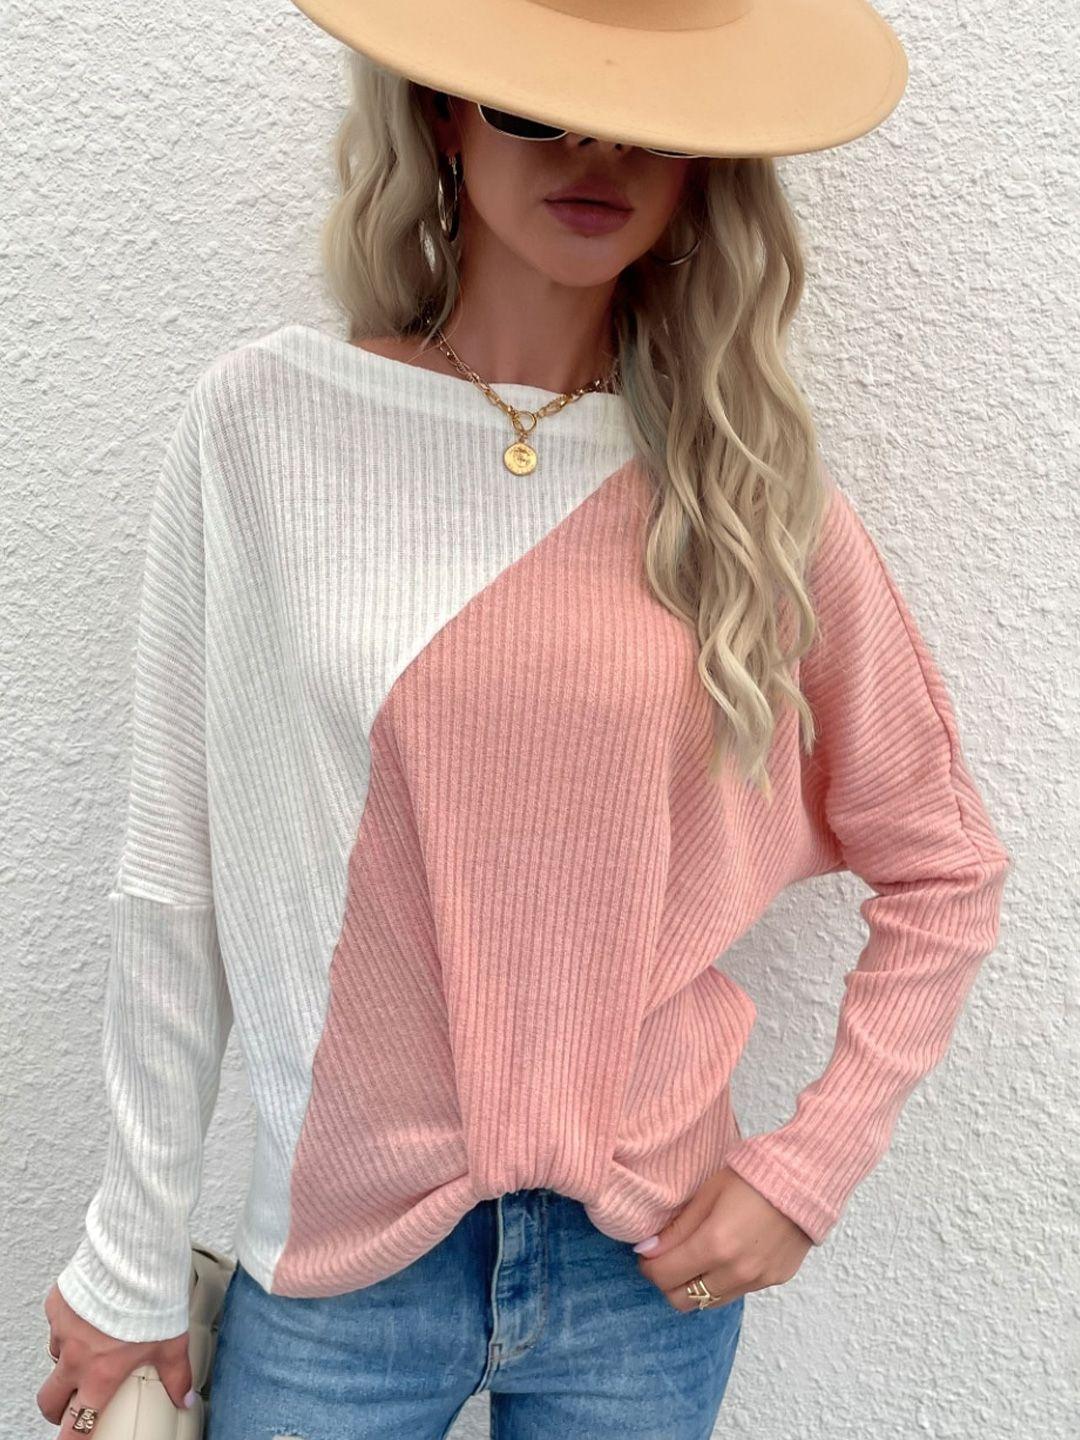 stylecast pink & white colourblocked pullover